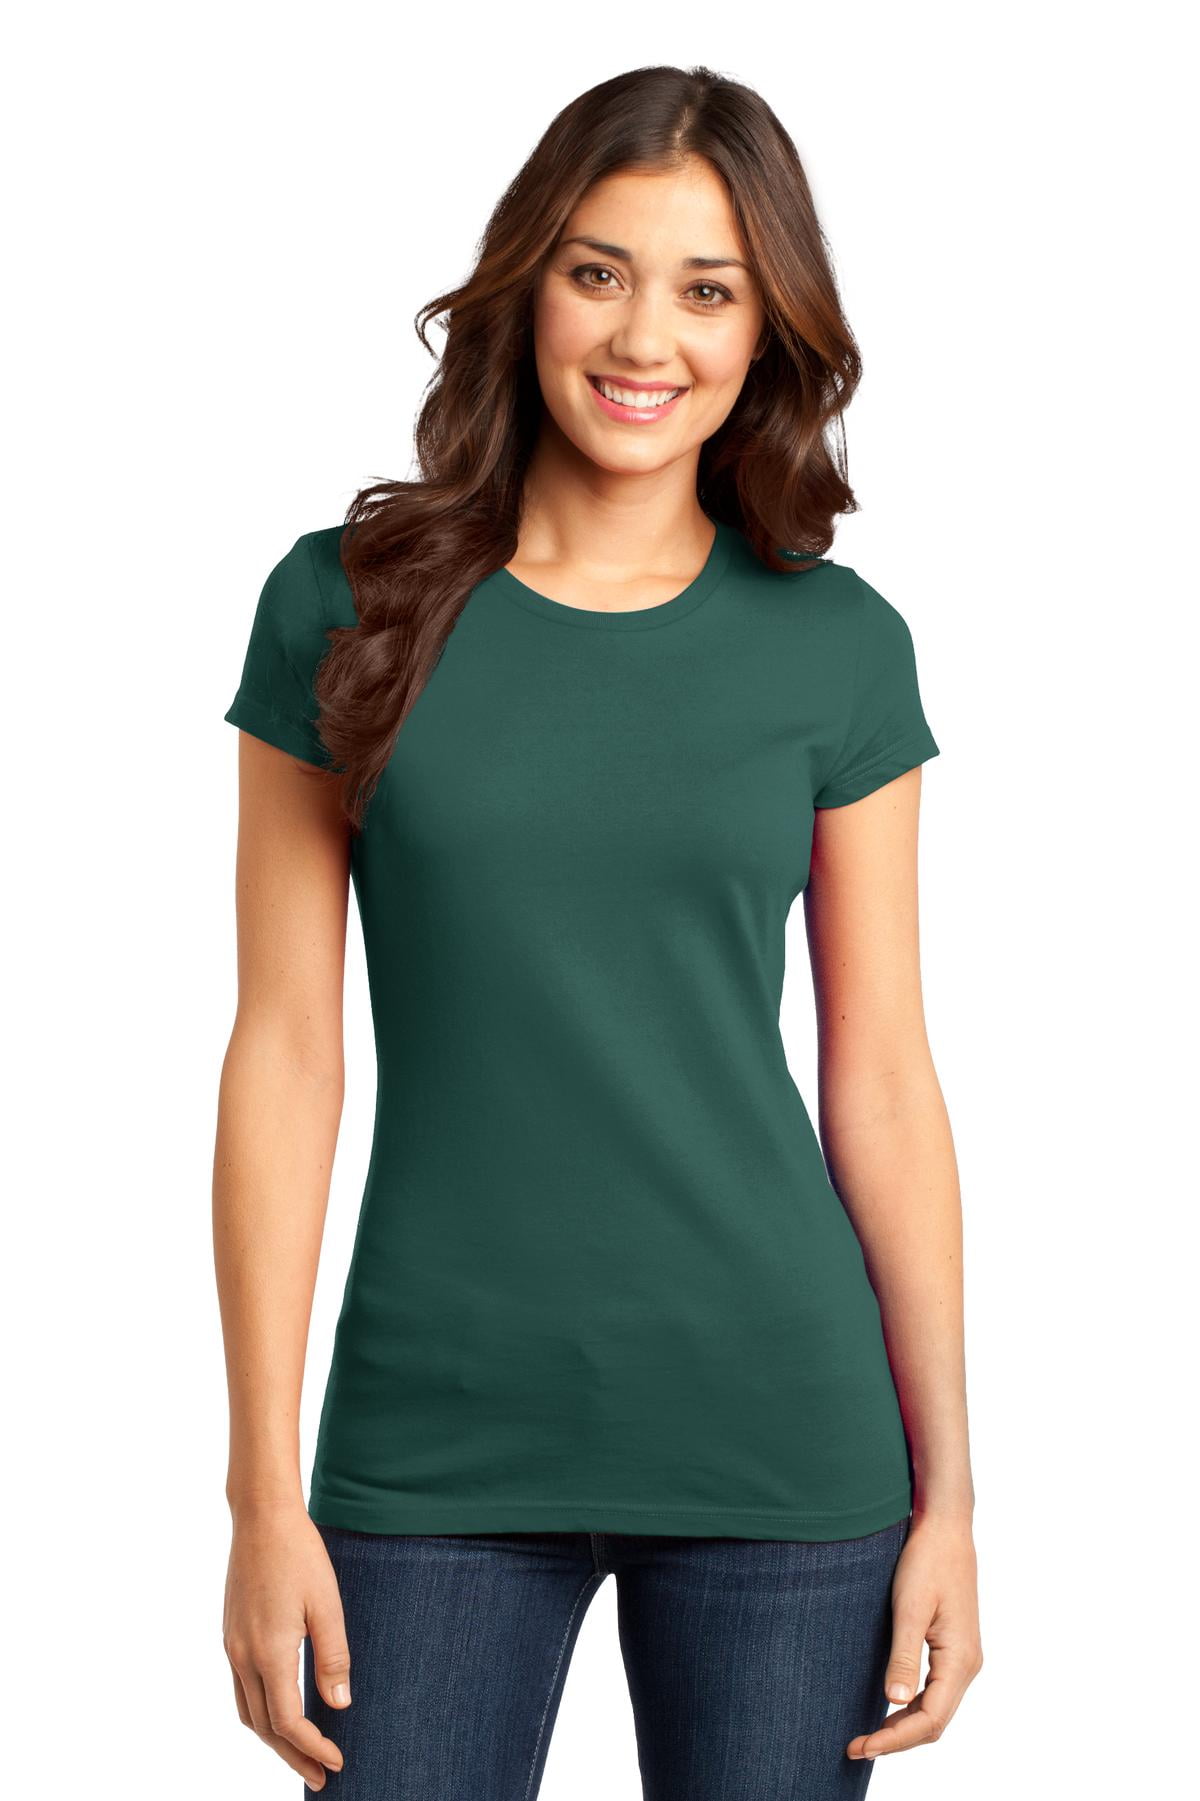 JustBlanks Women’s Short Sleeve Fitted Very Important Tee 4.3-ounce ...